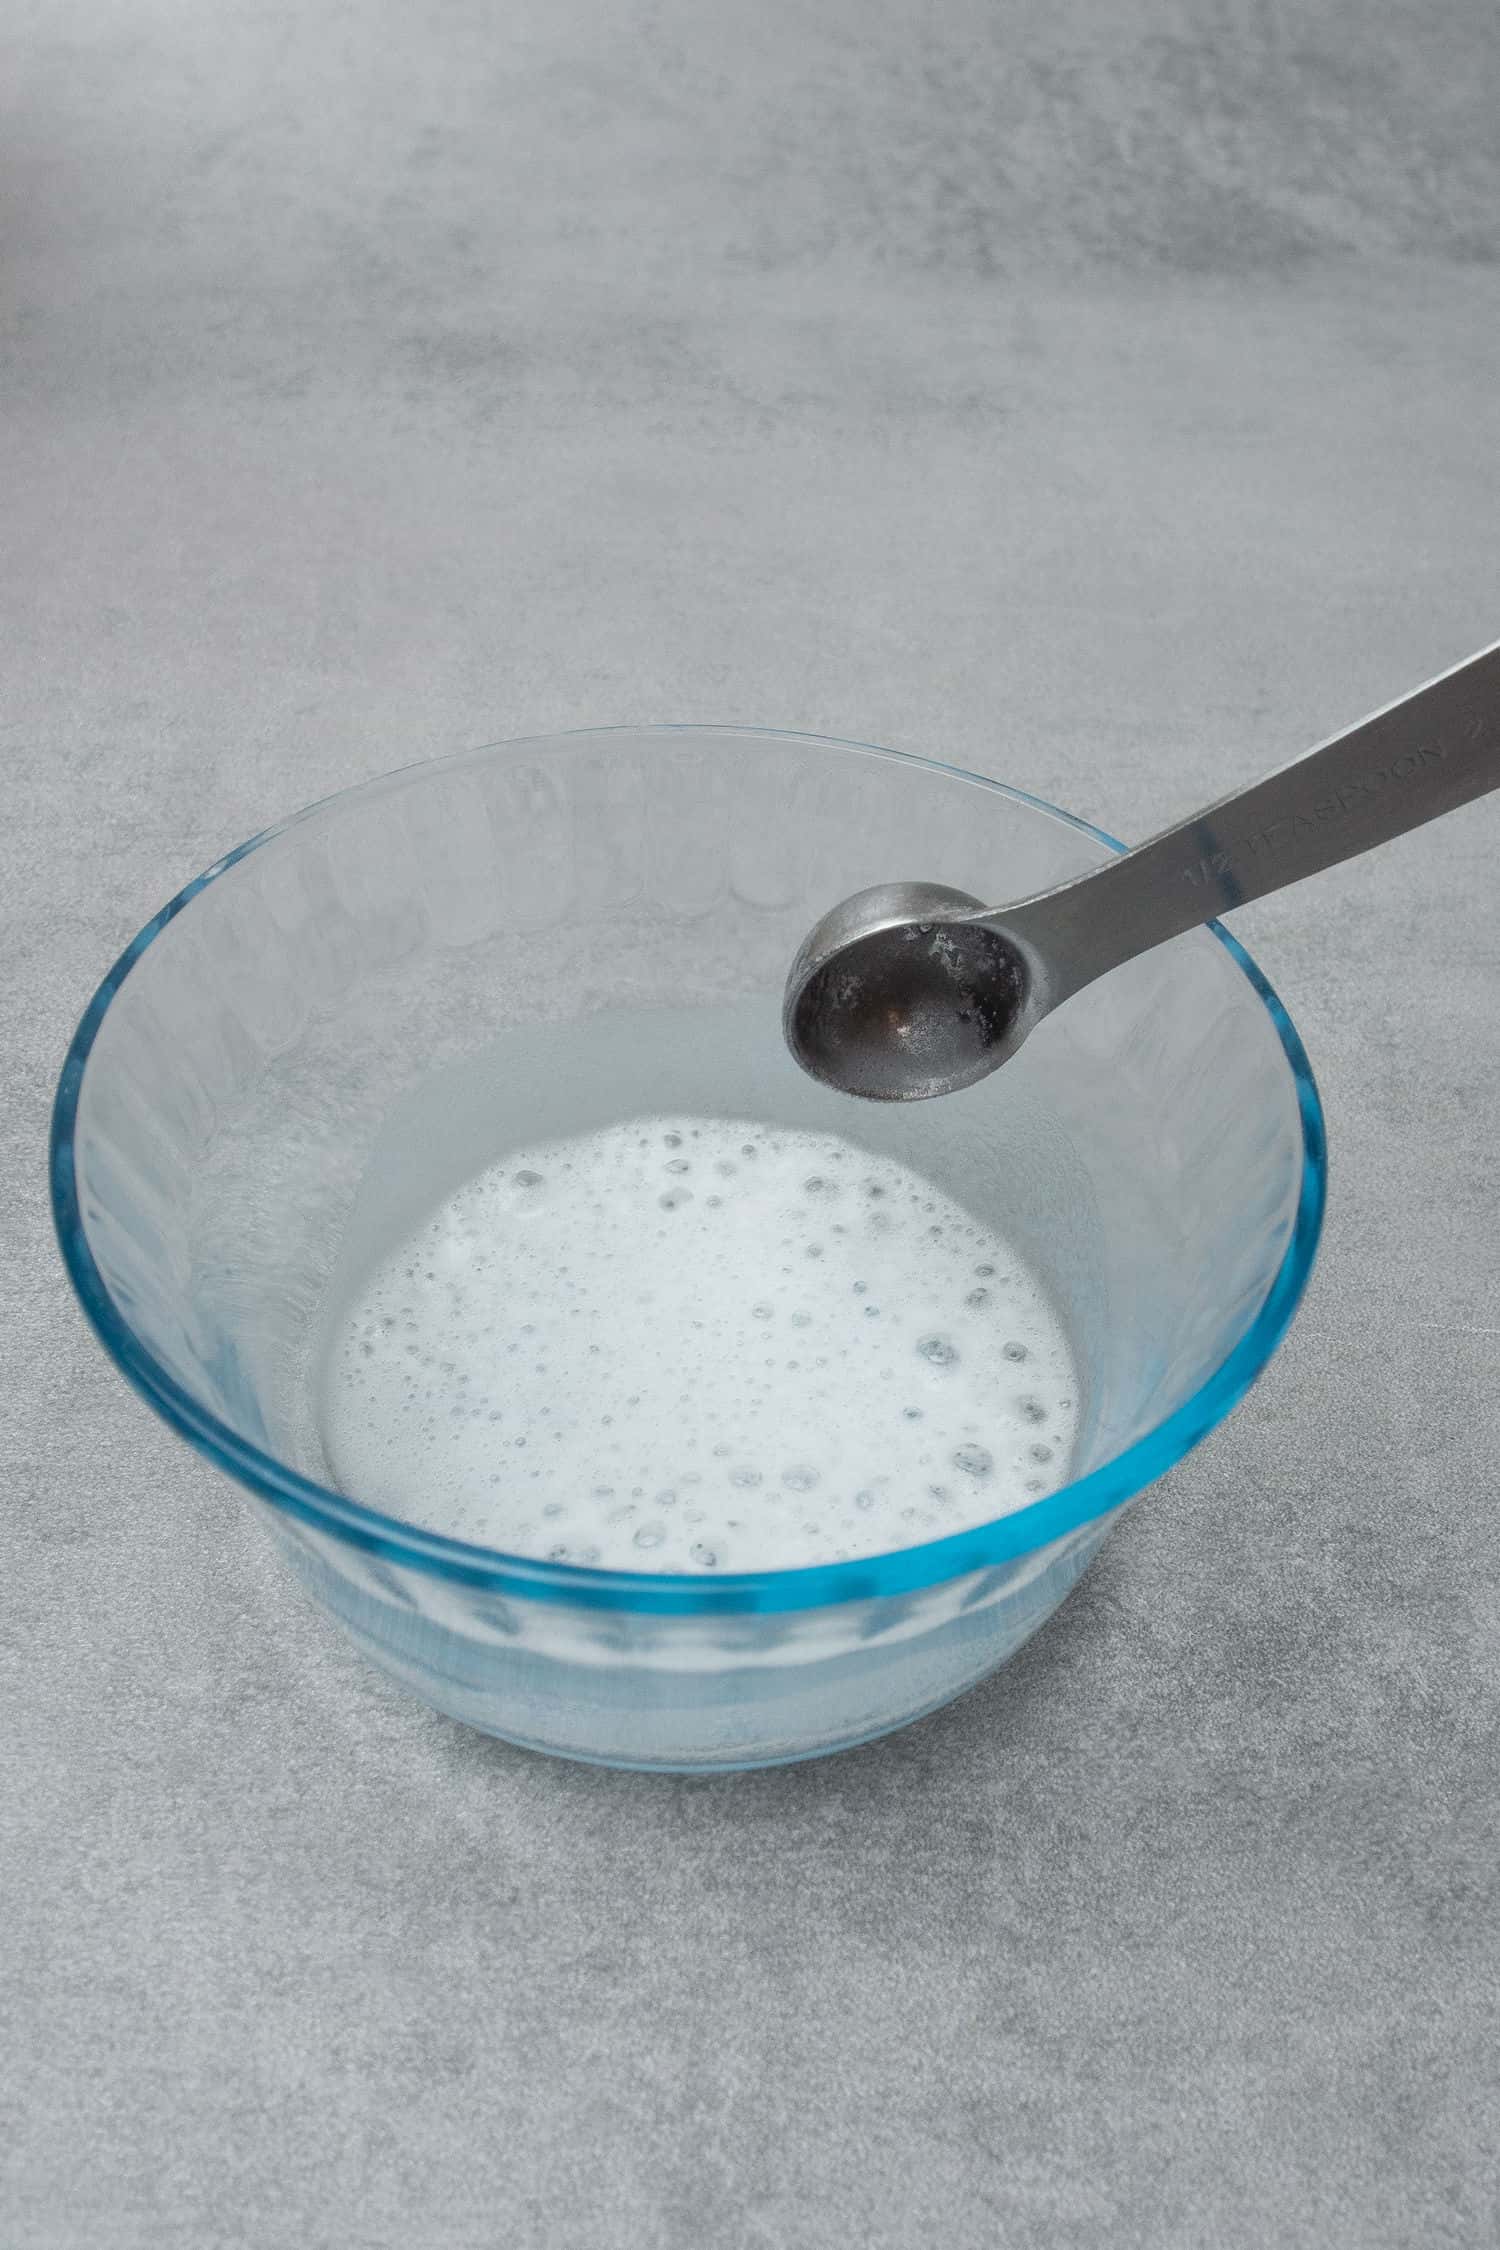 Mixing white vinegar and baking soda in a small bowl.